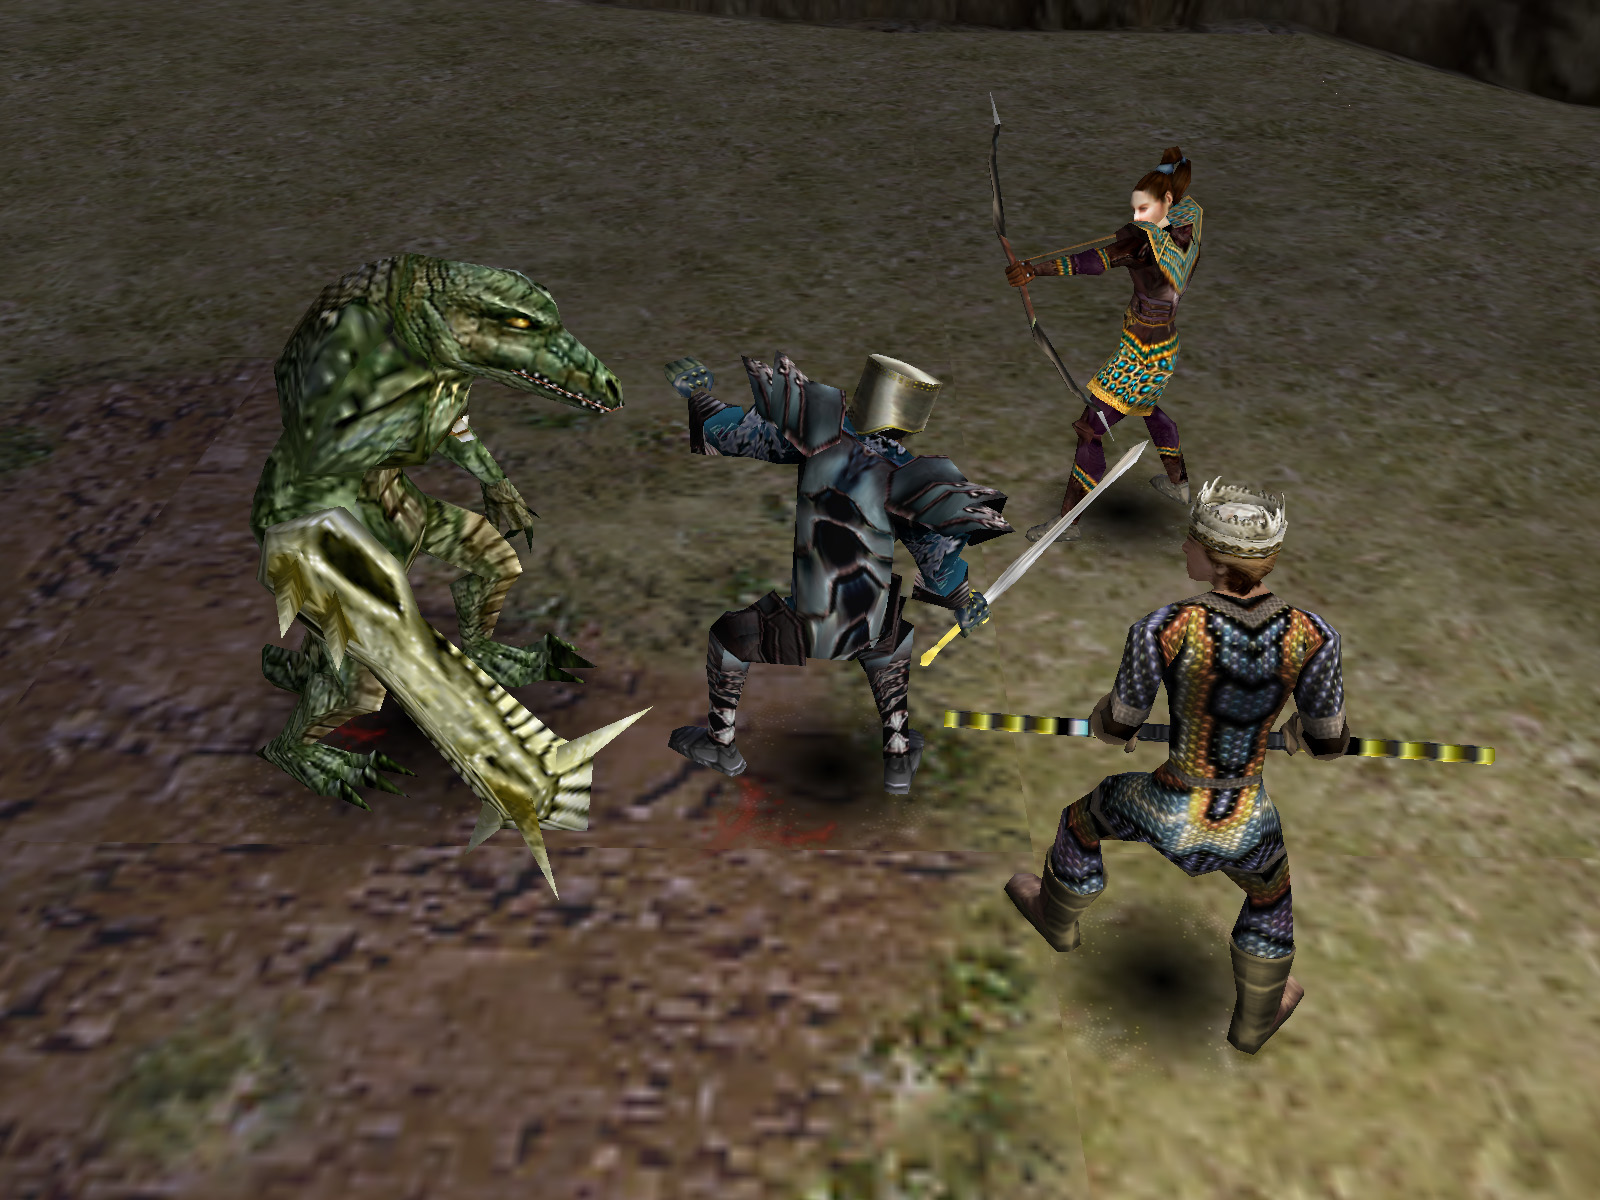 dungeon siege legends of aranna download full game free